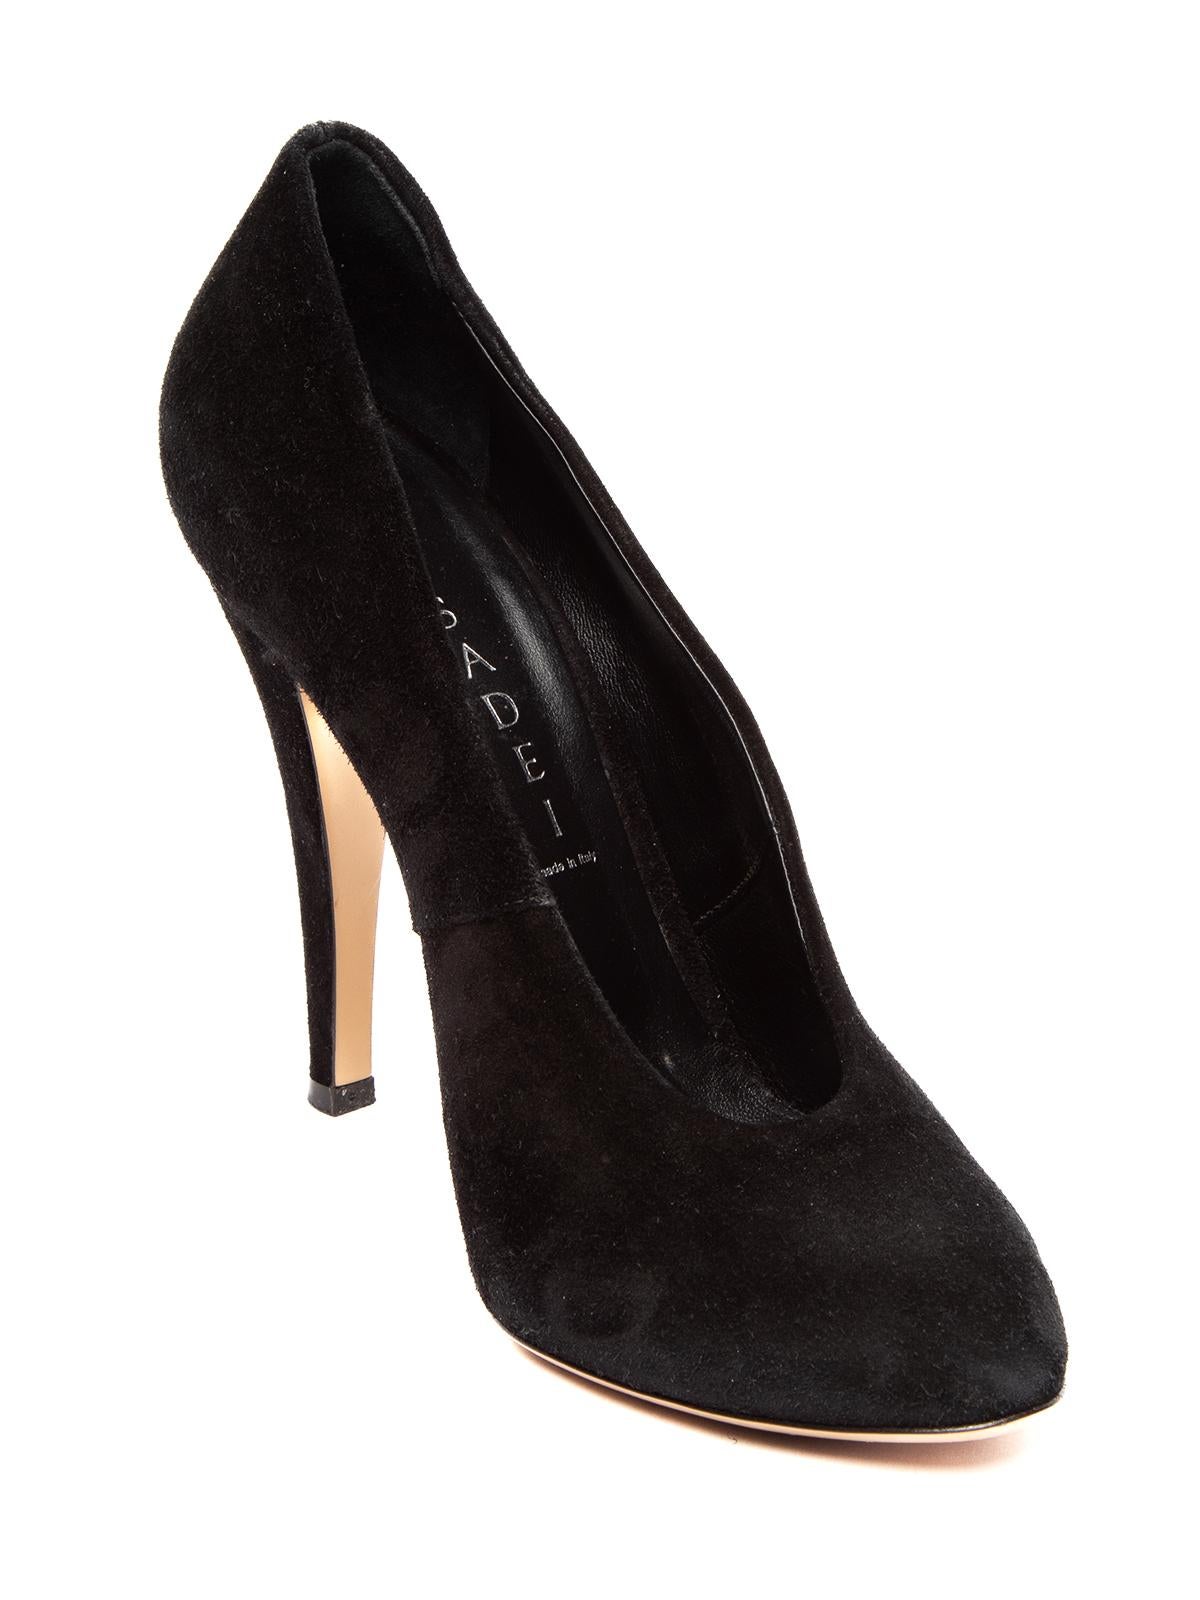 Pre-Loved Casadei Women's Black Suede Pumps In Good Condition In London, GB